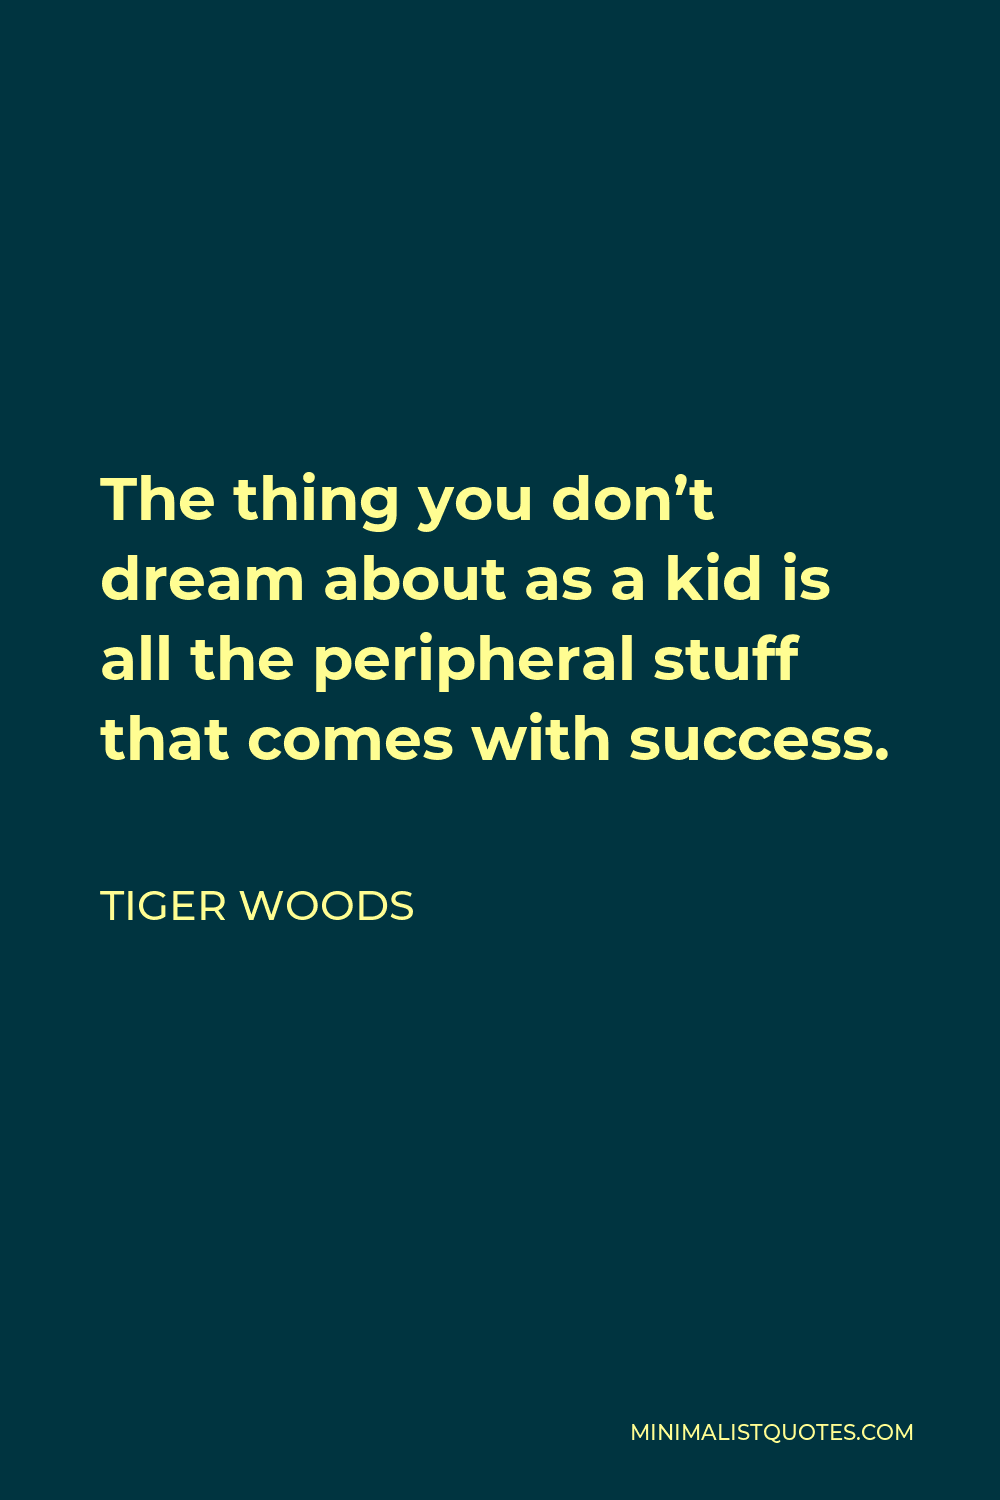 Tiger Woods Quote - The thing you don’t dream about as a kid is all the peripheral stuff that comes with success.